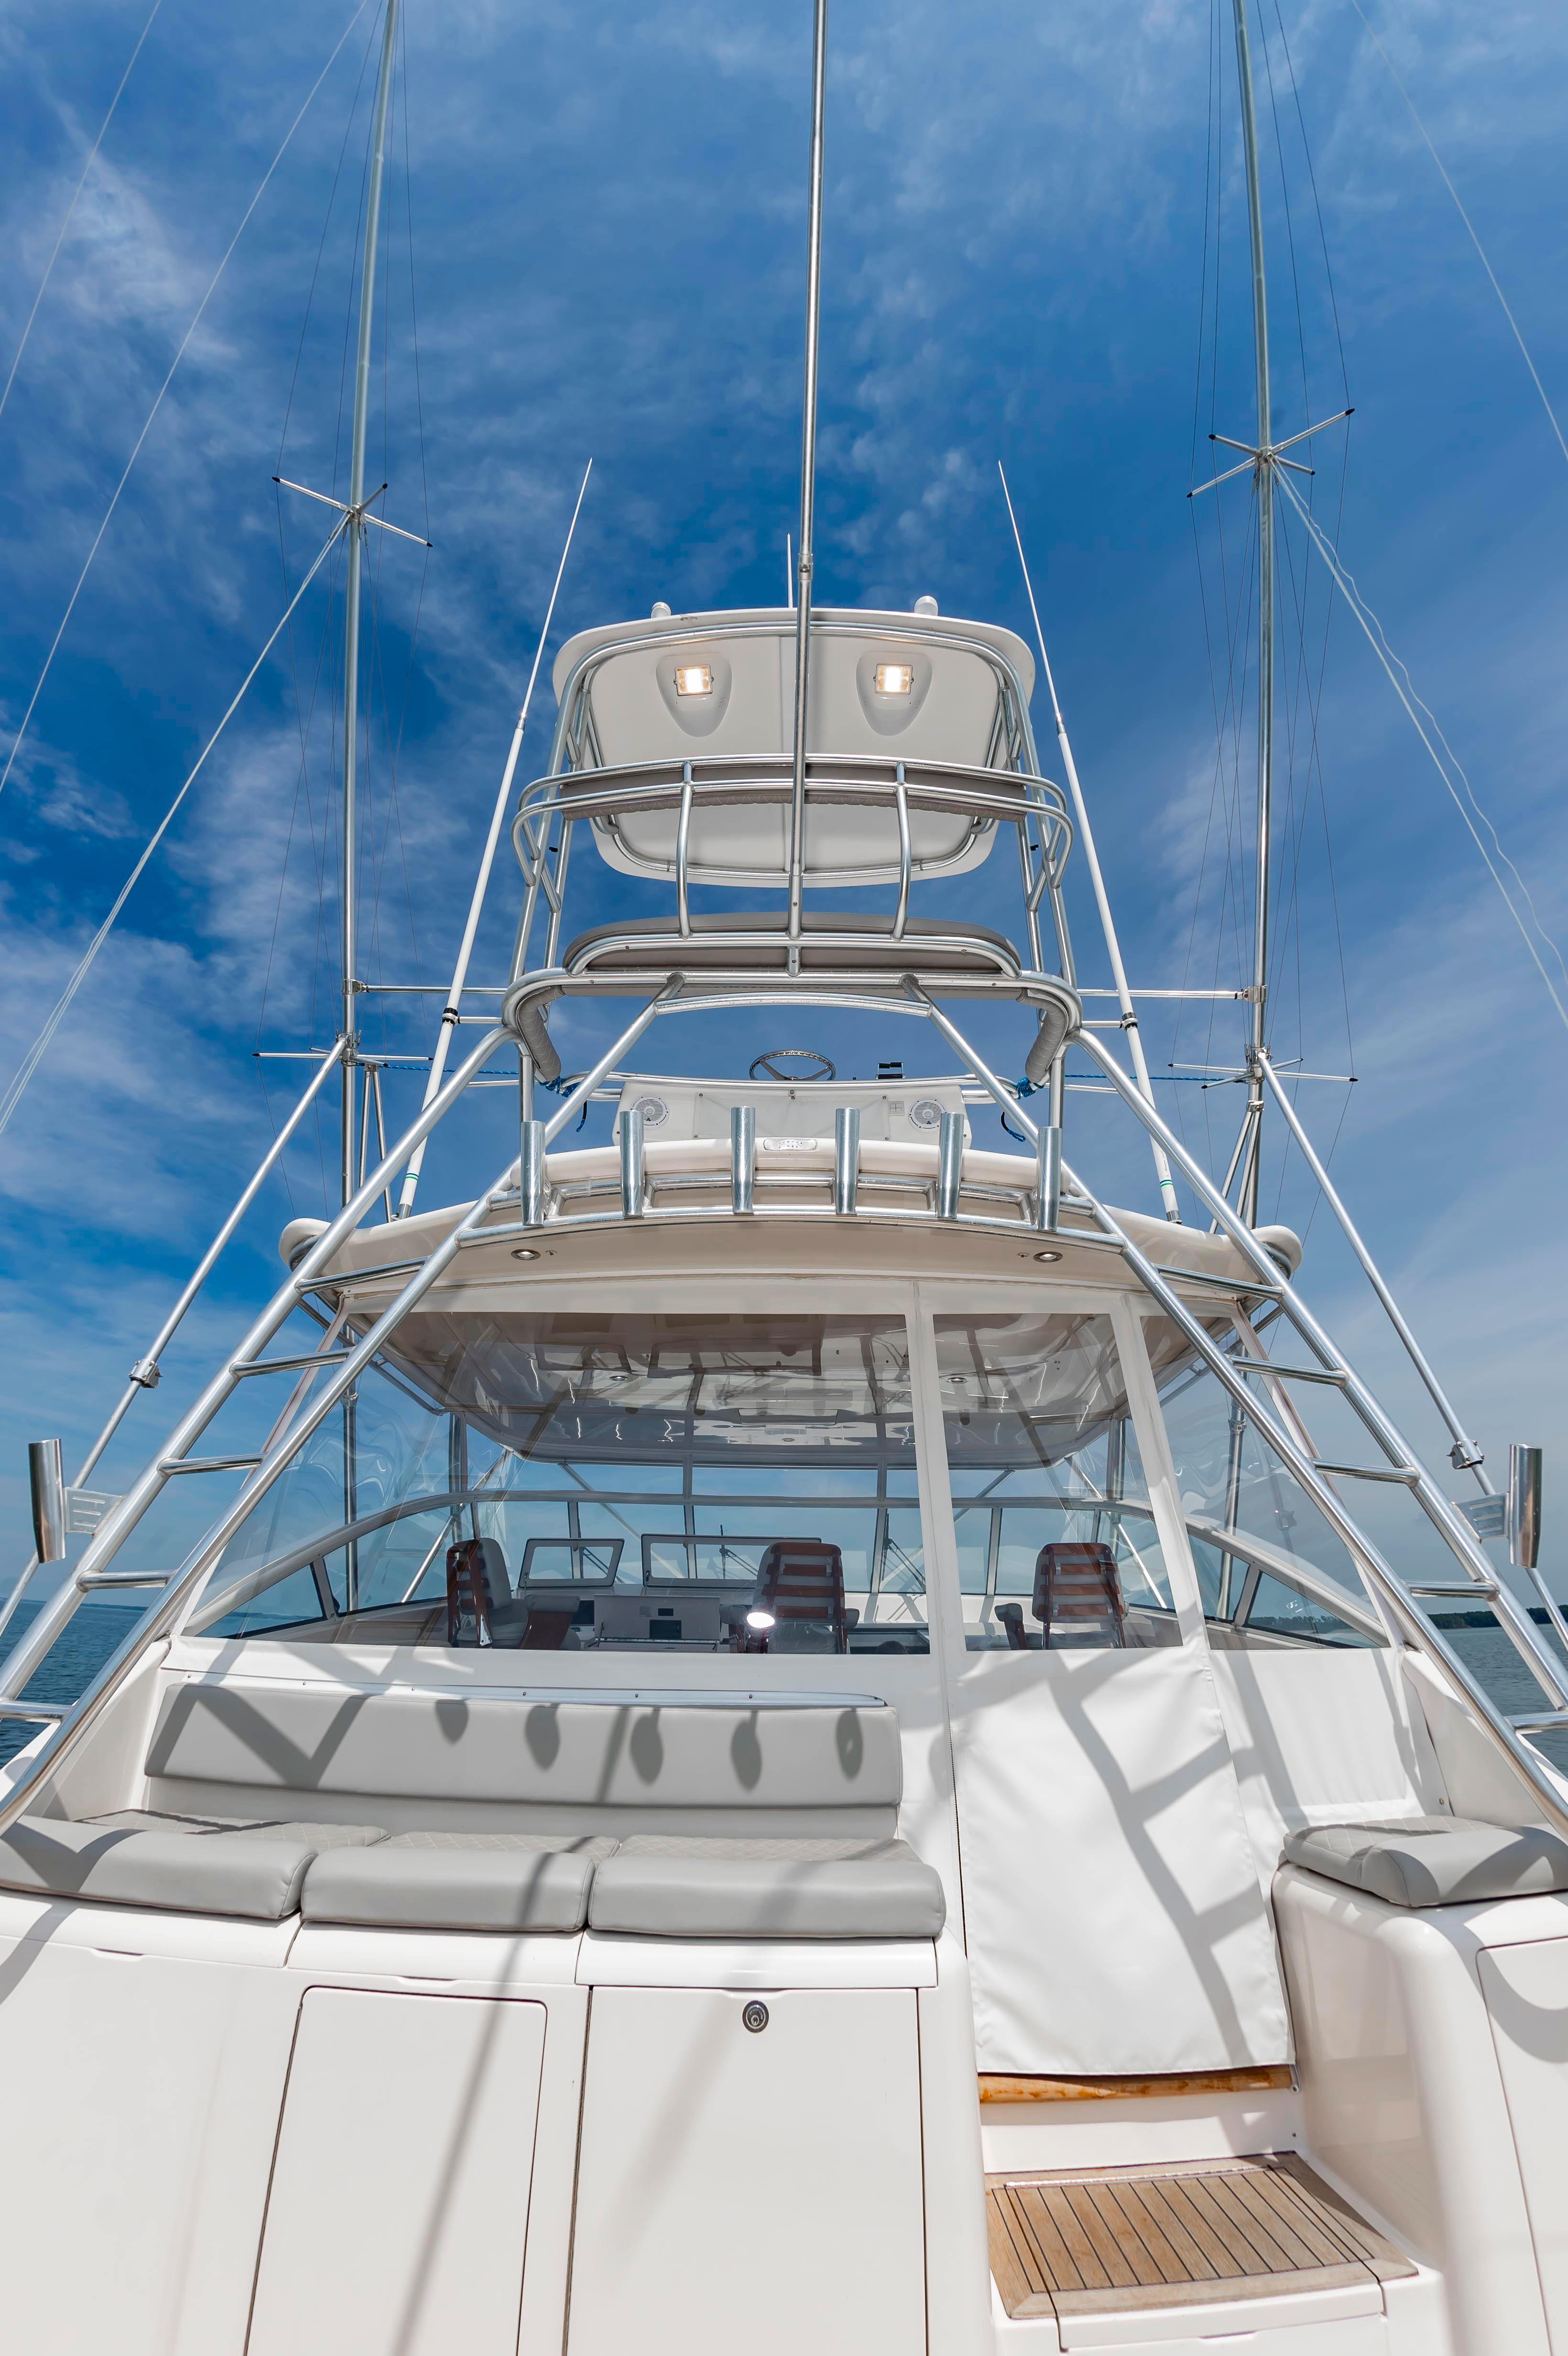 2006 Viking 45 Express "Cool Blue", tower view